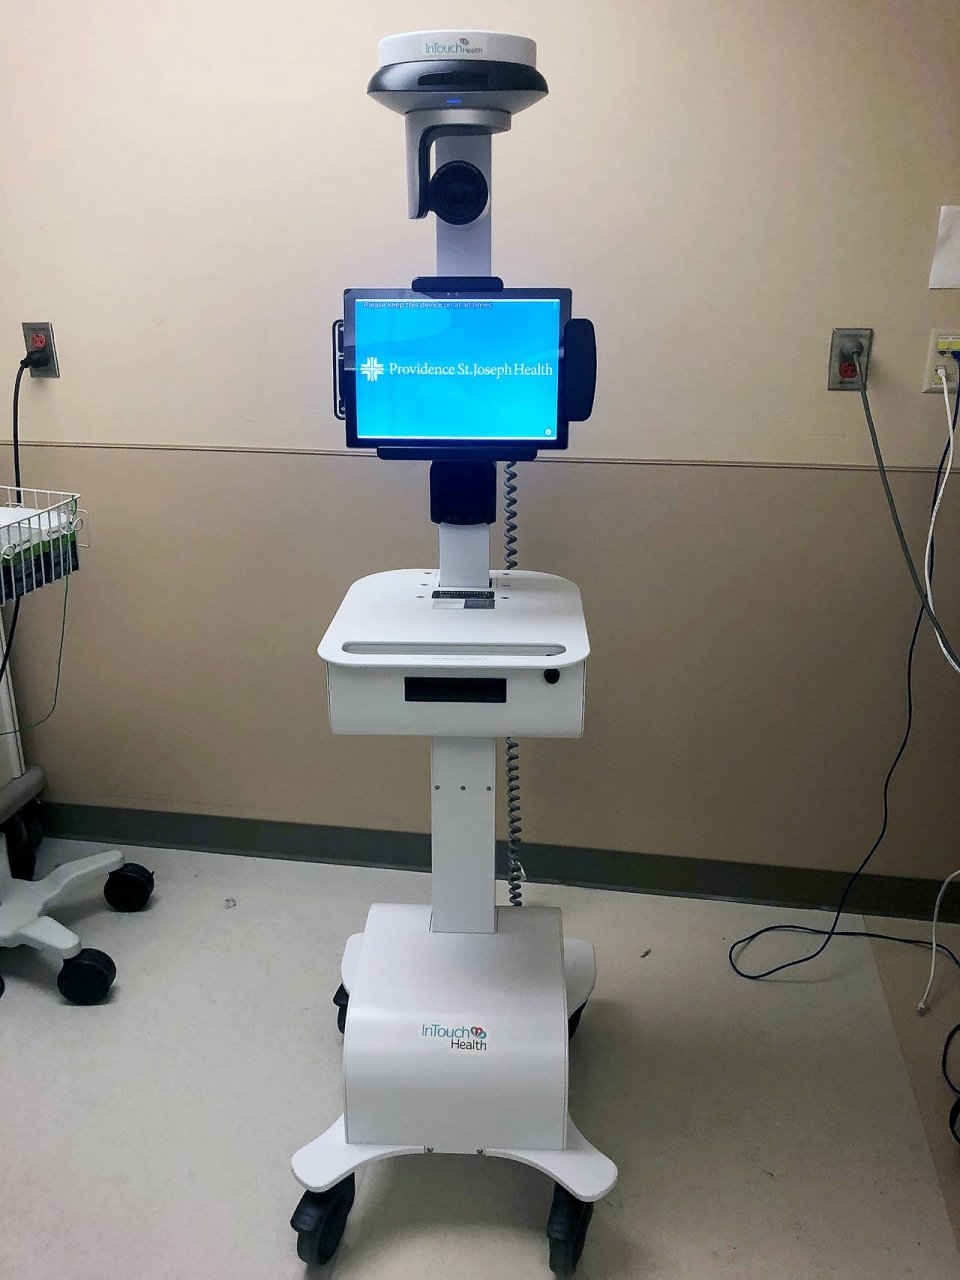 robot-doctor-takecare-of-conoravirus-patients